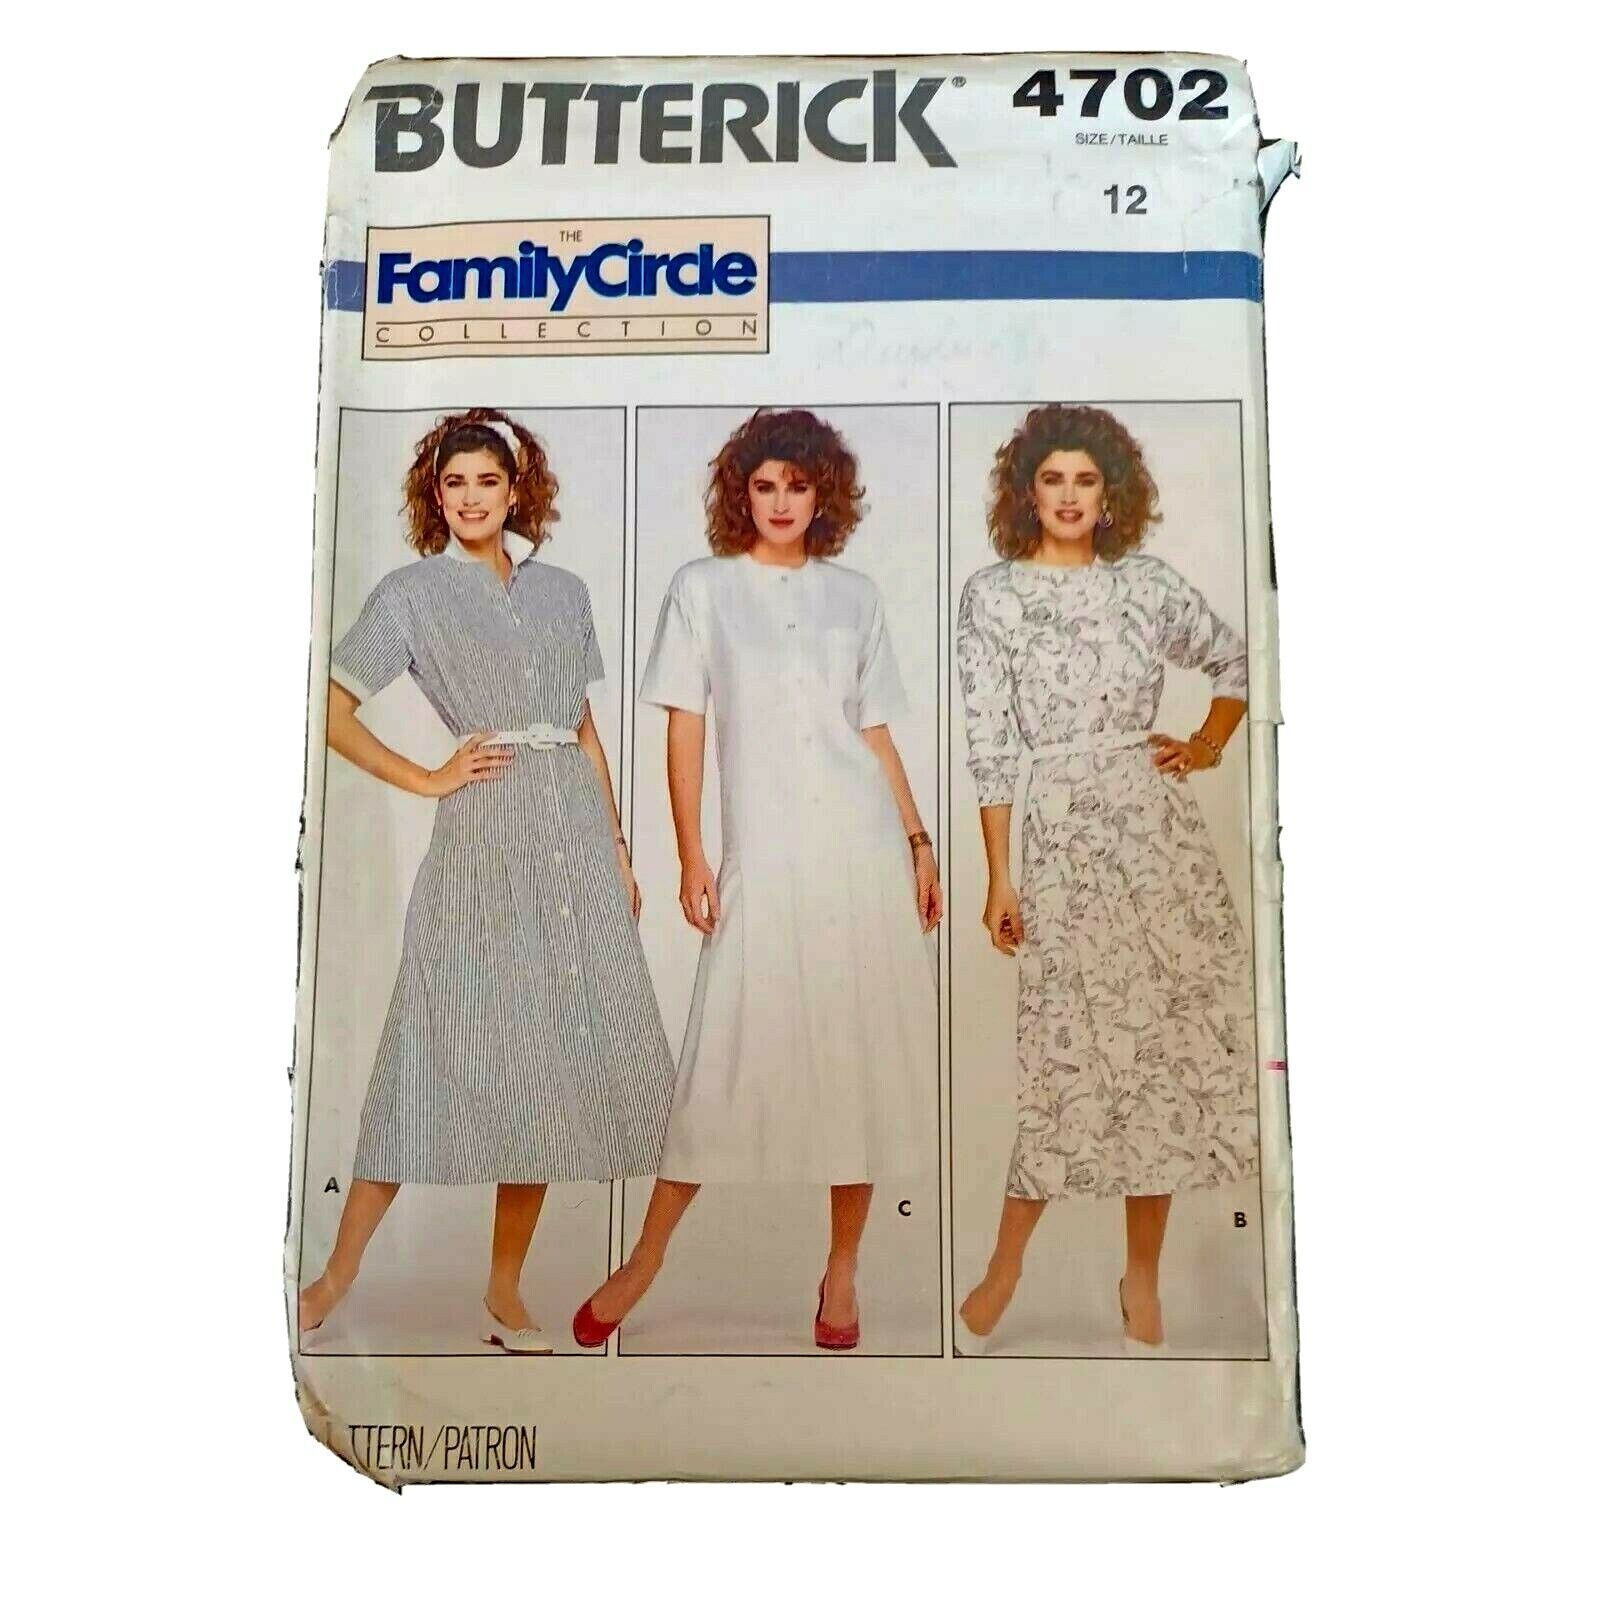 Primary image for 1987 Butterick Sewing Pattern 4702 Size 12 Family Circle Misses Dress Uncut